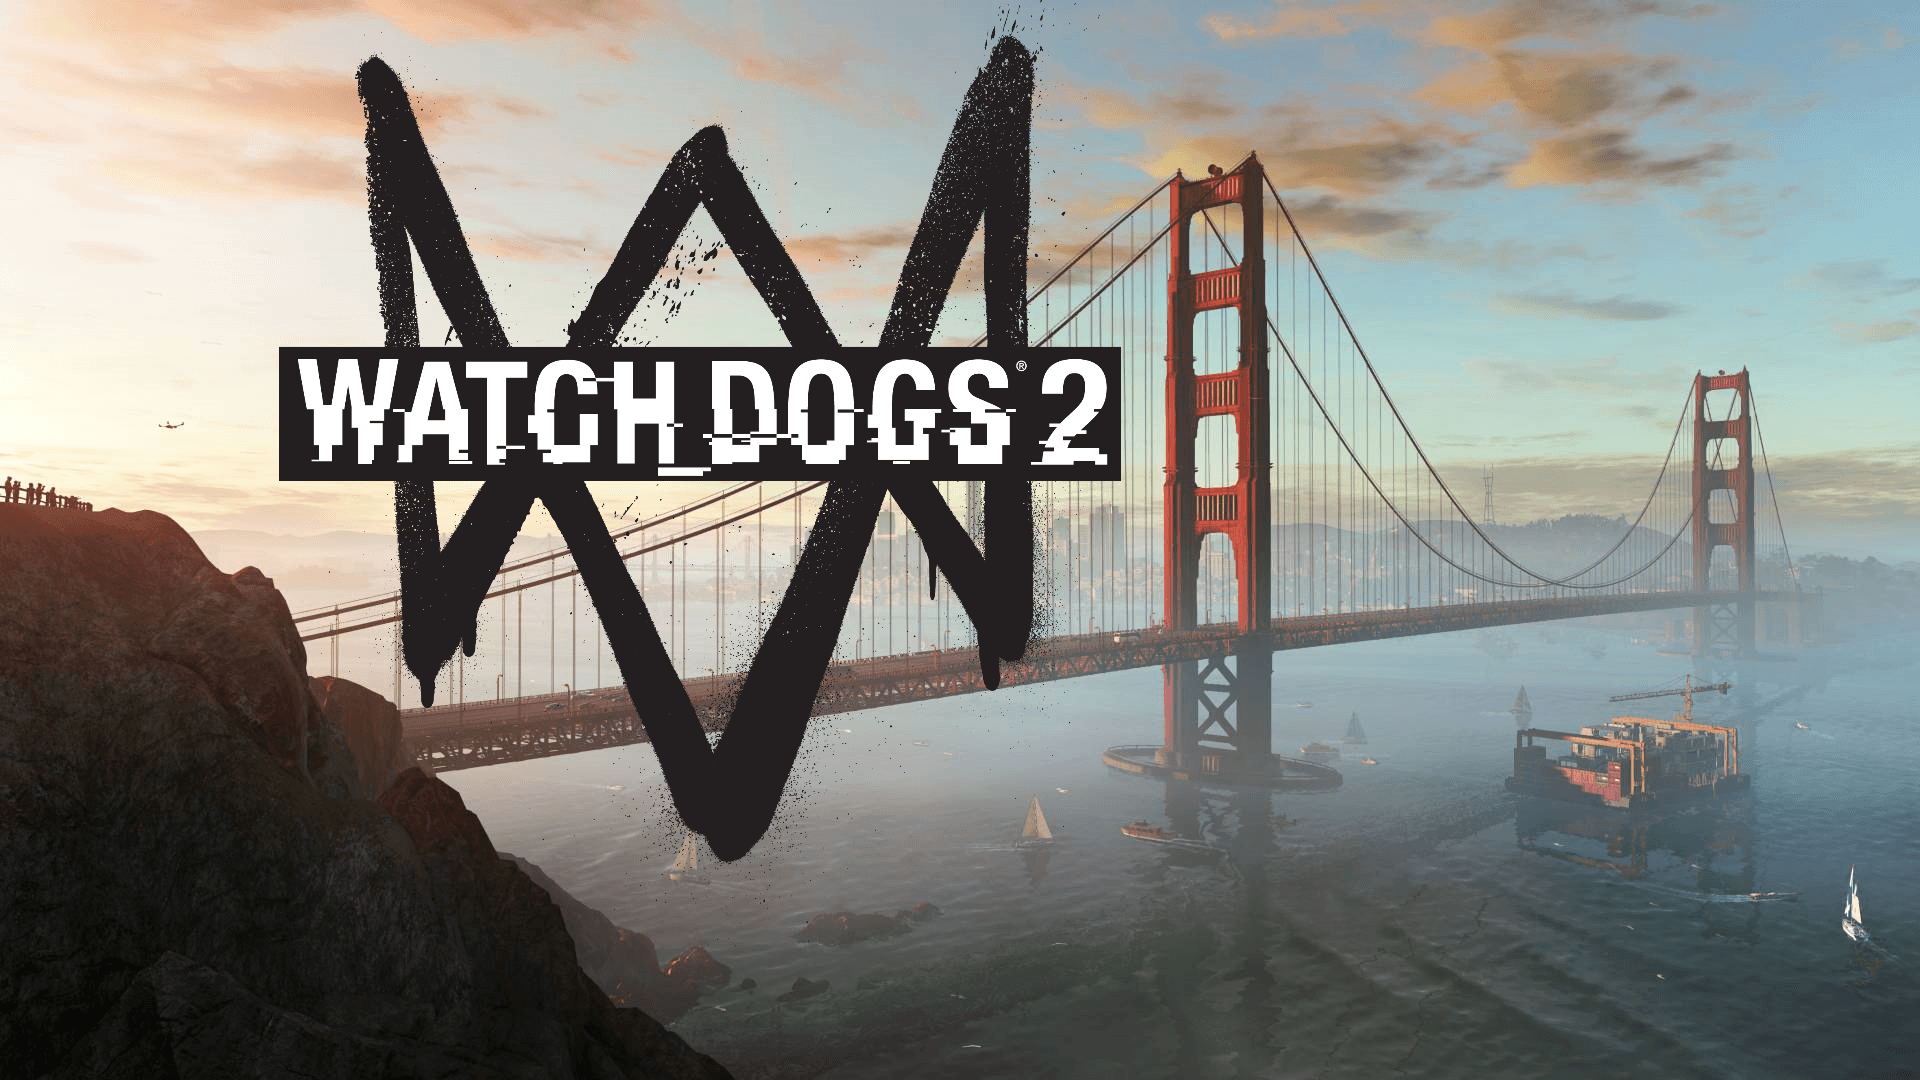 Watch Dogs 2 Wallpaper Image Photo Picture Background